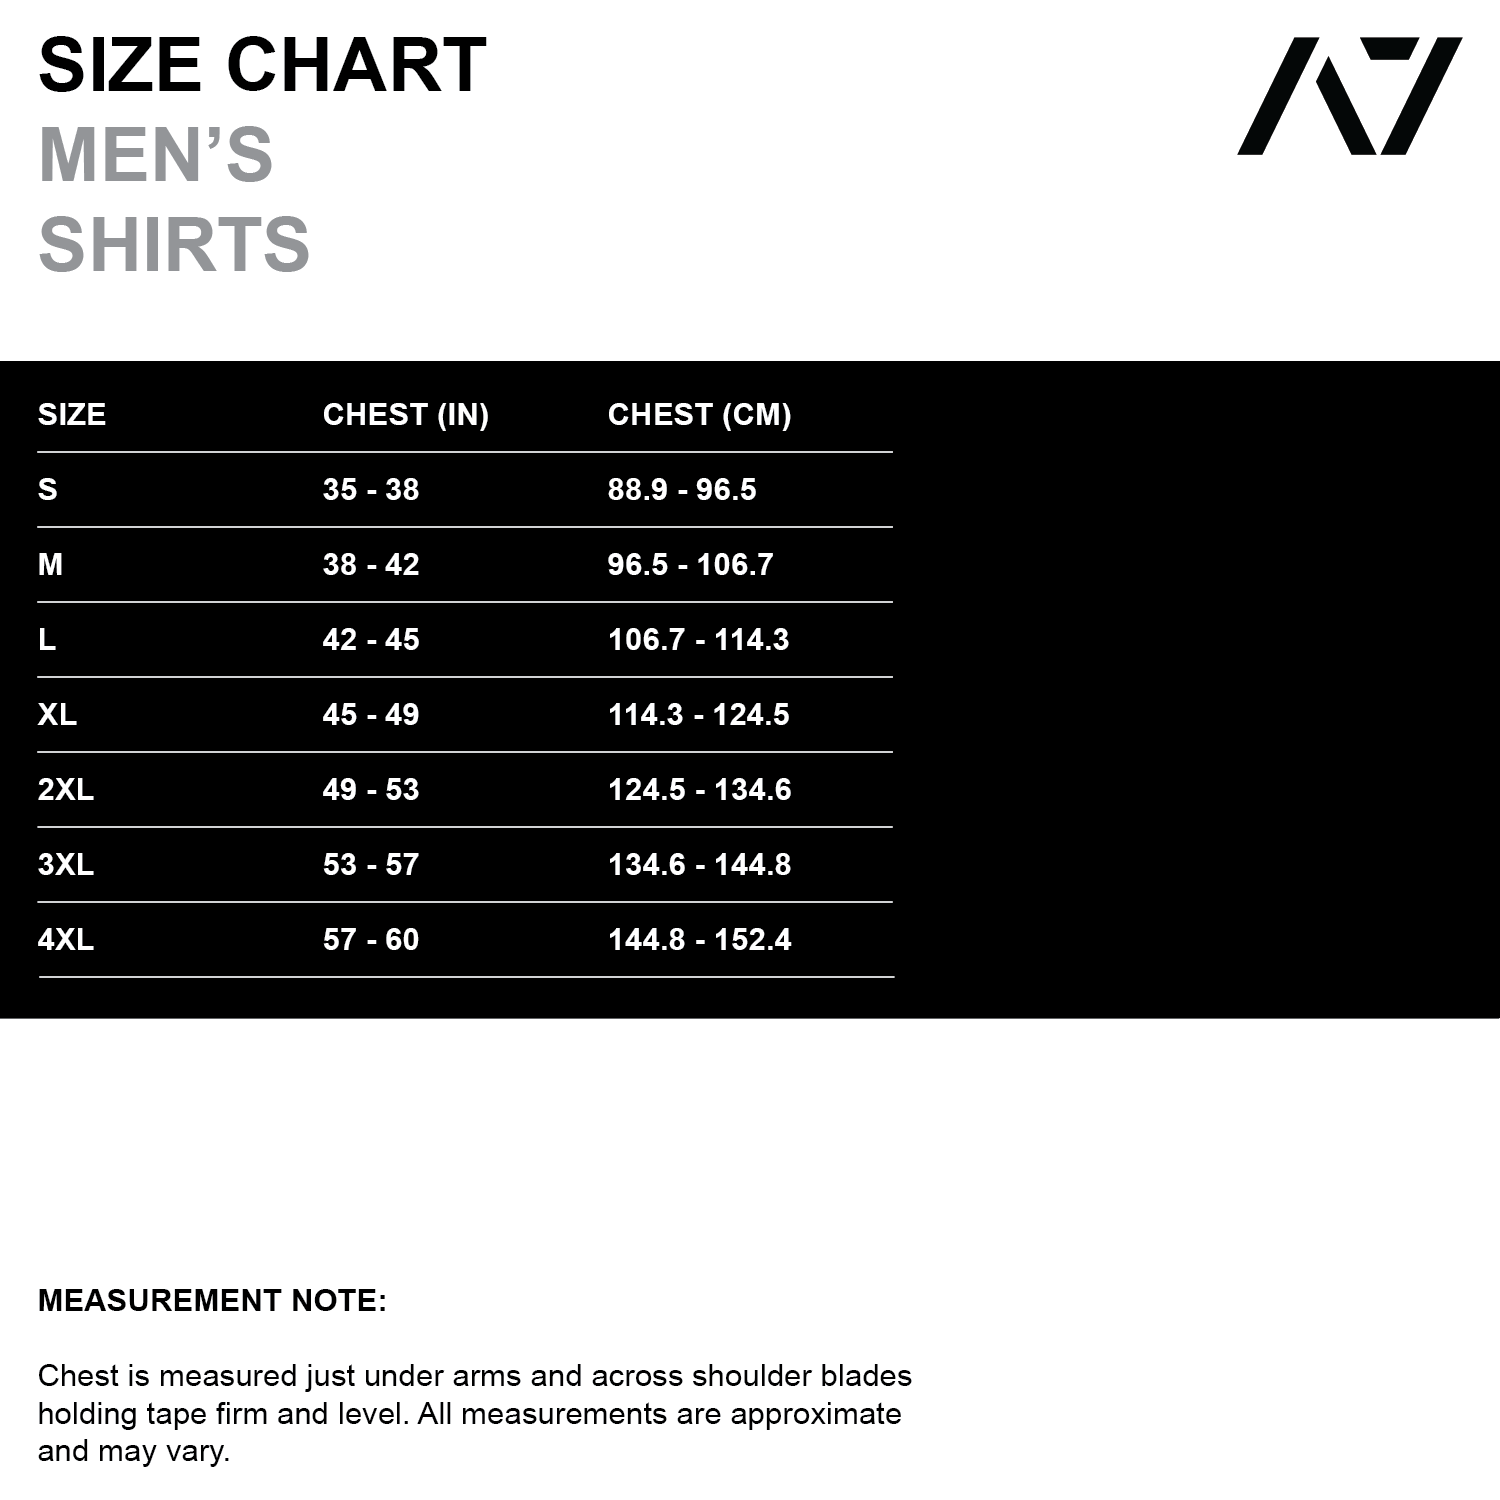 DG23 Ivory Rose is our new meet shirt design highlighting Demand Greatness with a double outline font to showcase your impact on the platform. The DG23 Meet Shirt is IPF Approved. Shop the full A7 Powerlifting IPF Approved Equipment collection. The IPF Approved Kit includes Powerlifting Singlet, A7 Meet Shirt, A7 Zebra Wrist Wraps, A7 Deadlift Socks, Hourglass Knee Sleeves (Stiff Knee Sleeves and Rigor Mortis Knee Sleeves). All A7 Powerlifting Equipment shipping to UK, Norway, Switzerland and Iceland. 